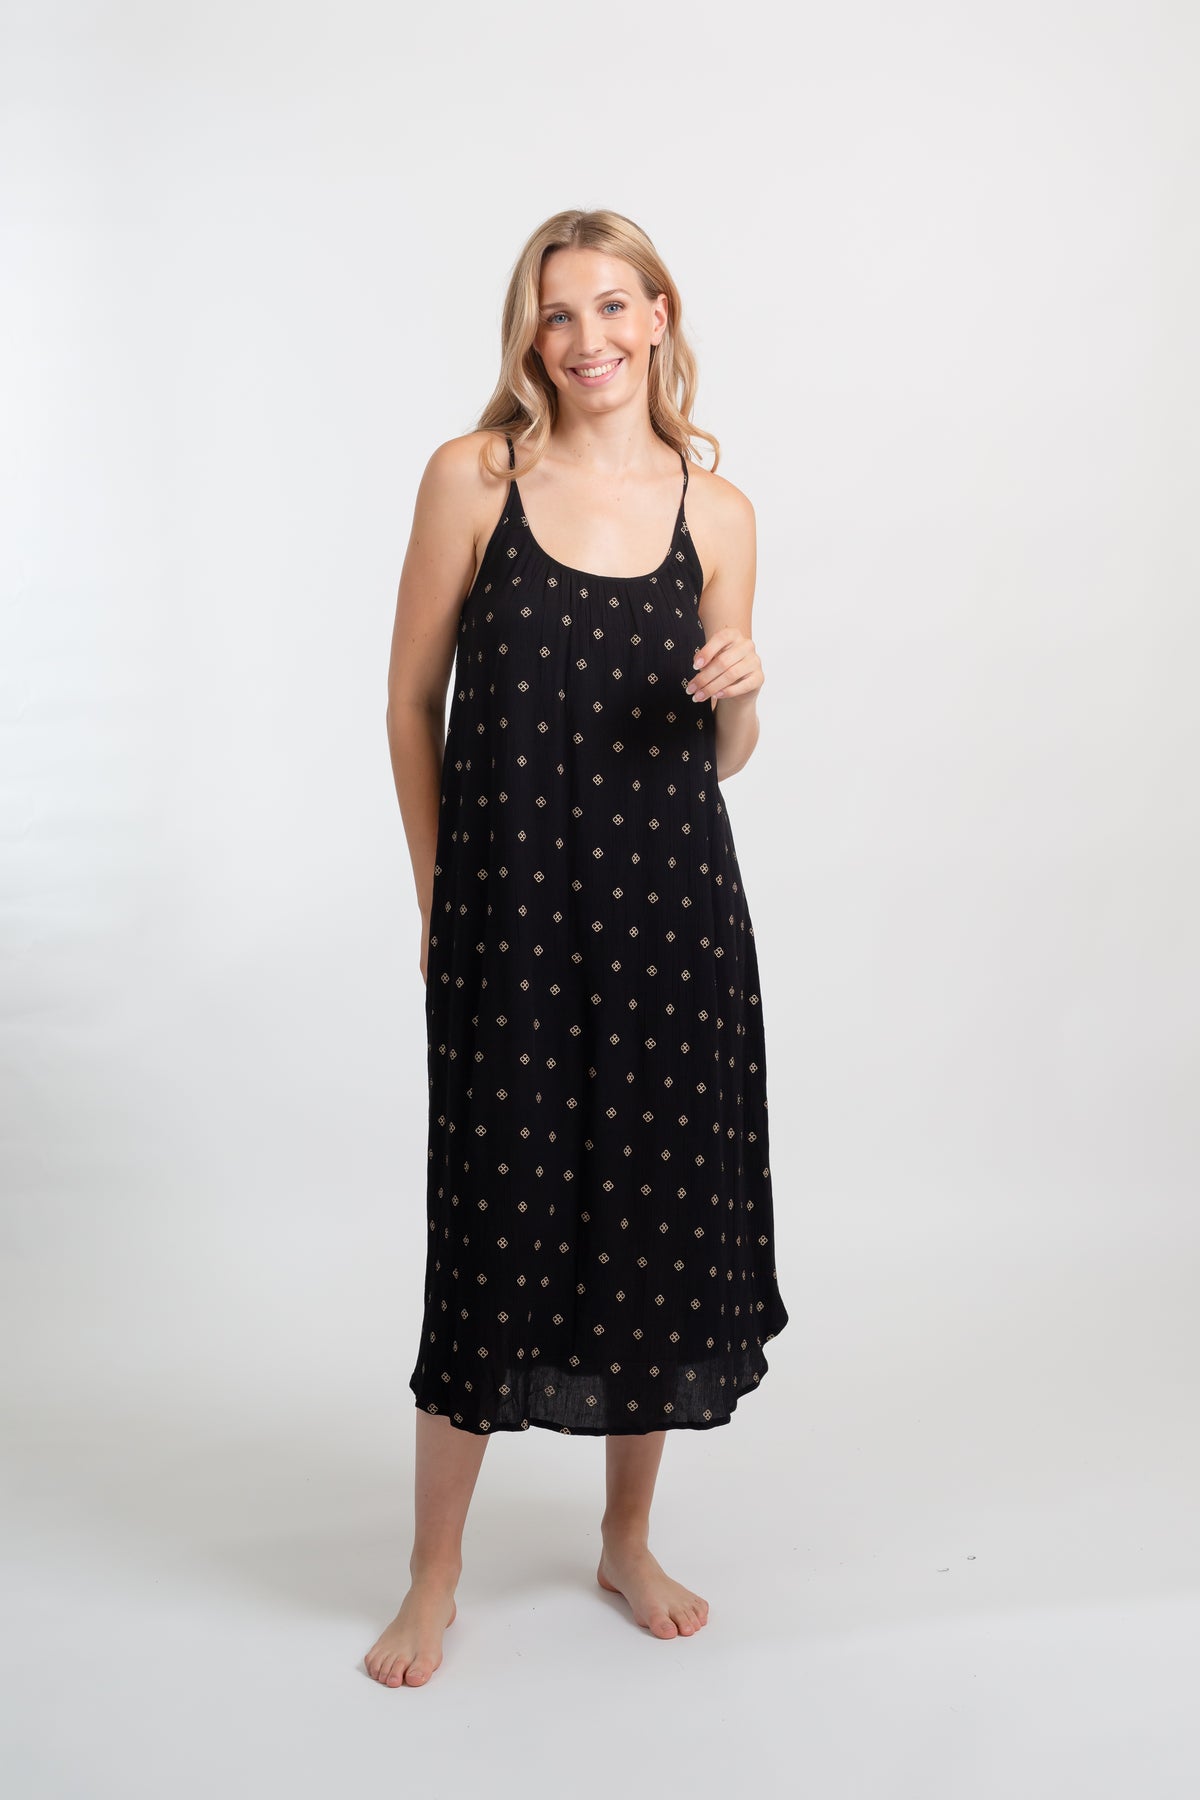 a blonde hair woman model facing front wearing a black with gold dot print vacation style midi dress smiling